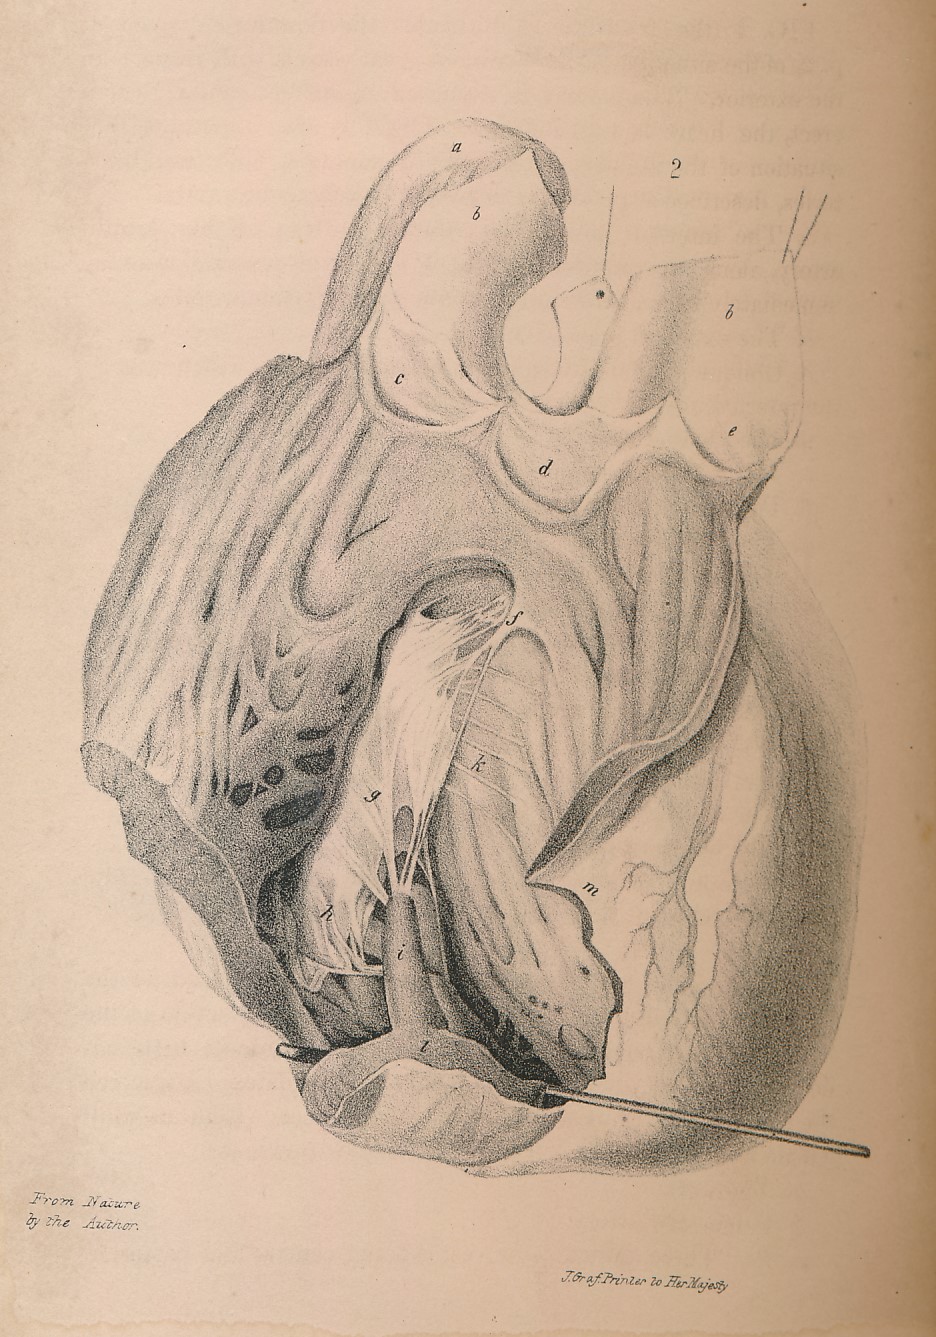 A Treatise on the Diseases of the Heart and Great Vessels, and on the Affections Which May be Mistaken for Them: Comprising the Author's View of the Physiology of the Heart's Action and Sounds, as Demonstrated by His Experiments on the Motions and Sounds